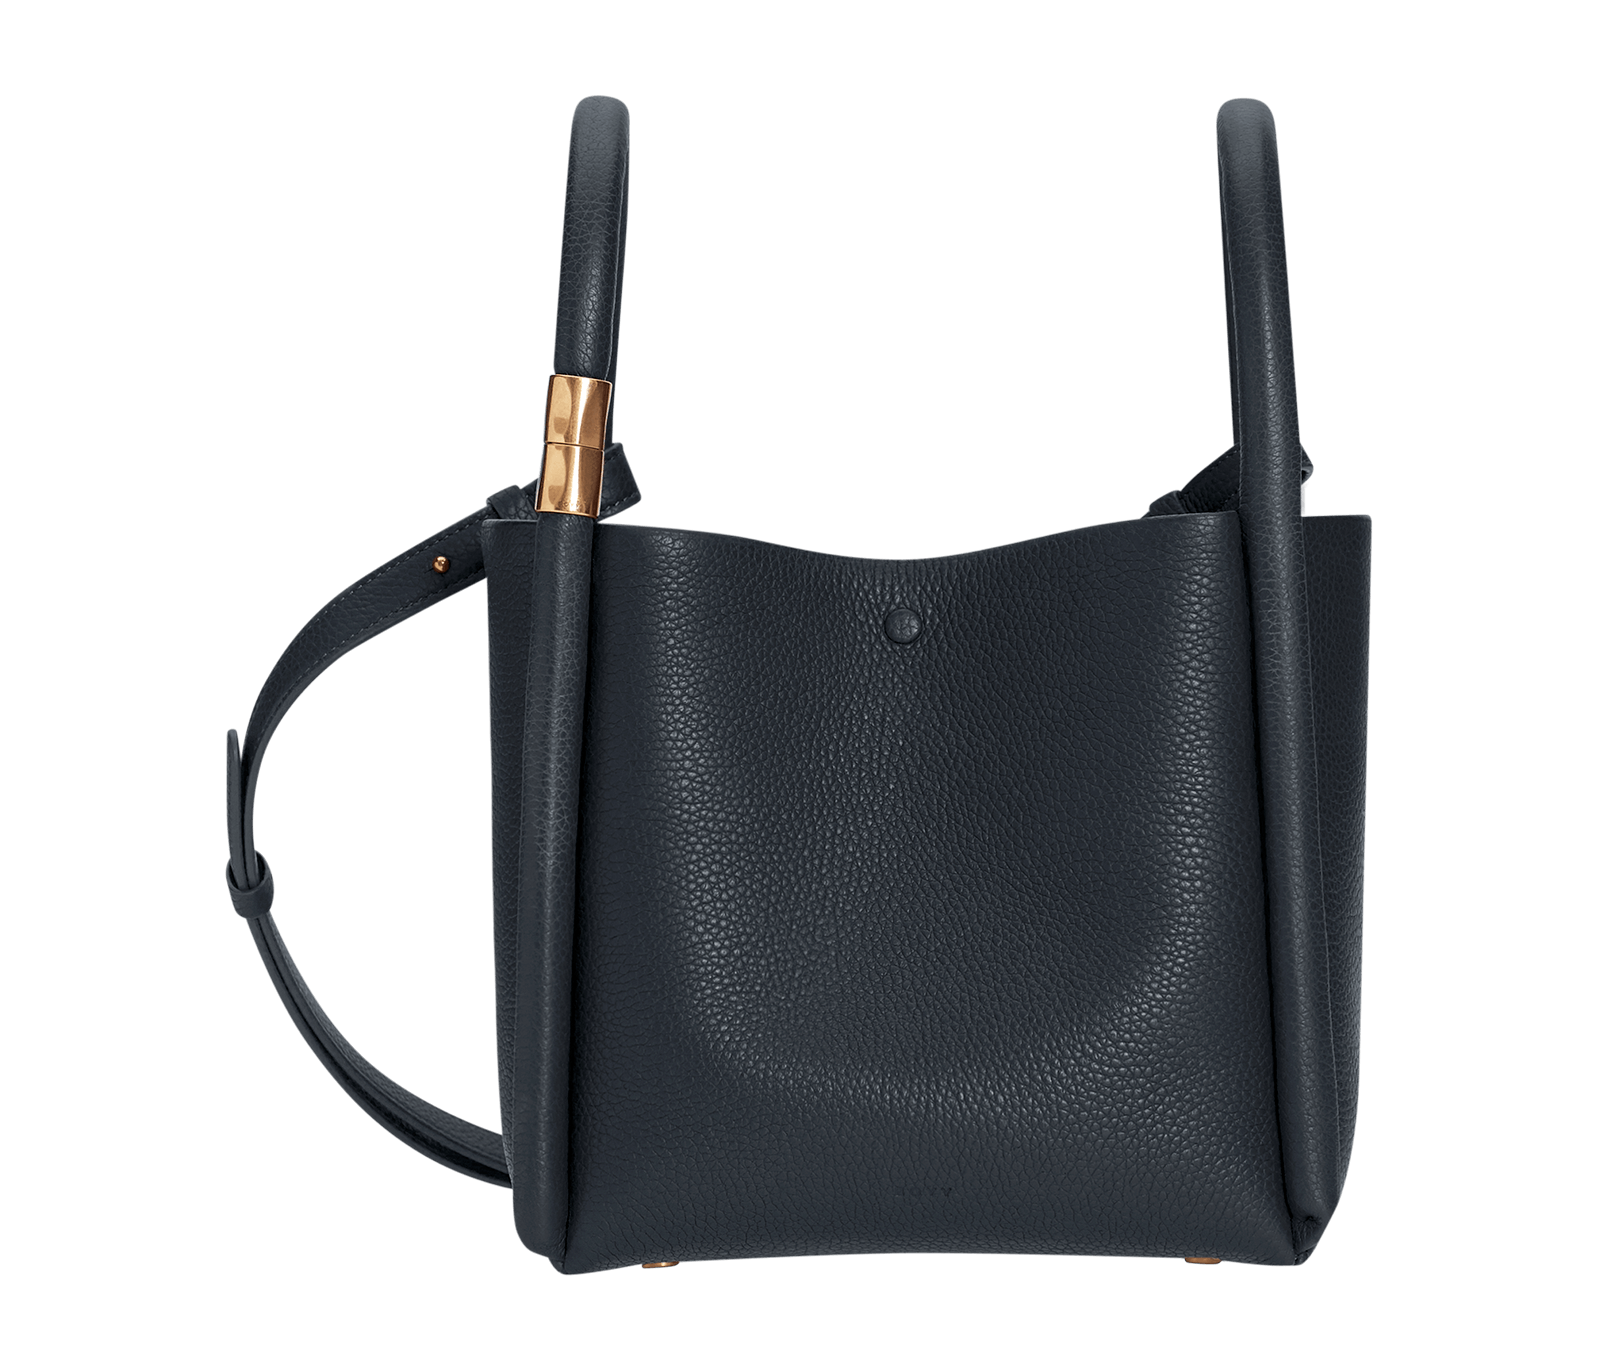 Blue, pebbled leather bag. Features oversized piping detail, an open top, intertwined handles, a subtle gold fastener, and a leather carrying strap.